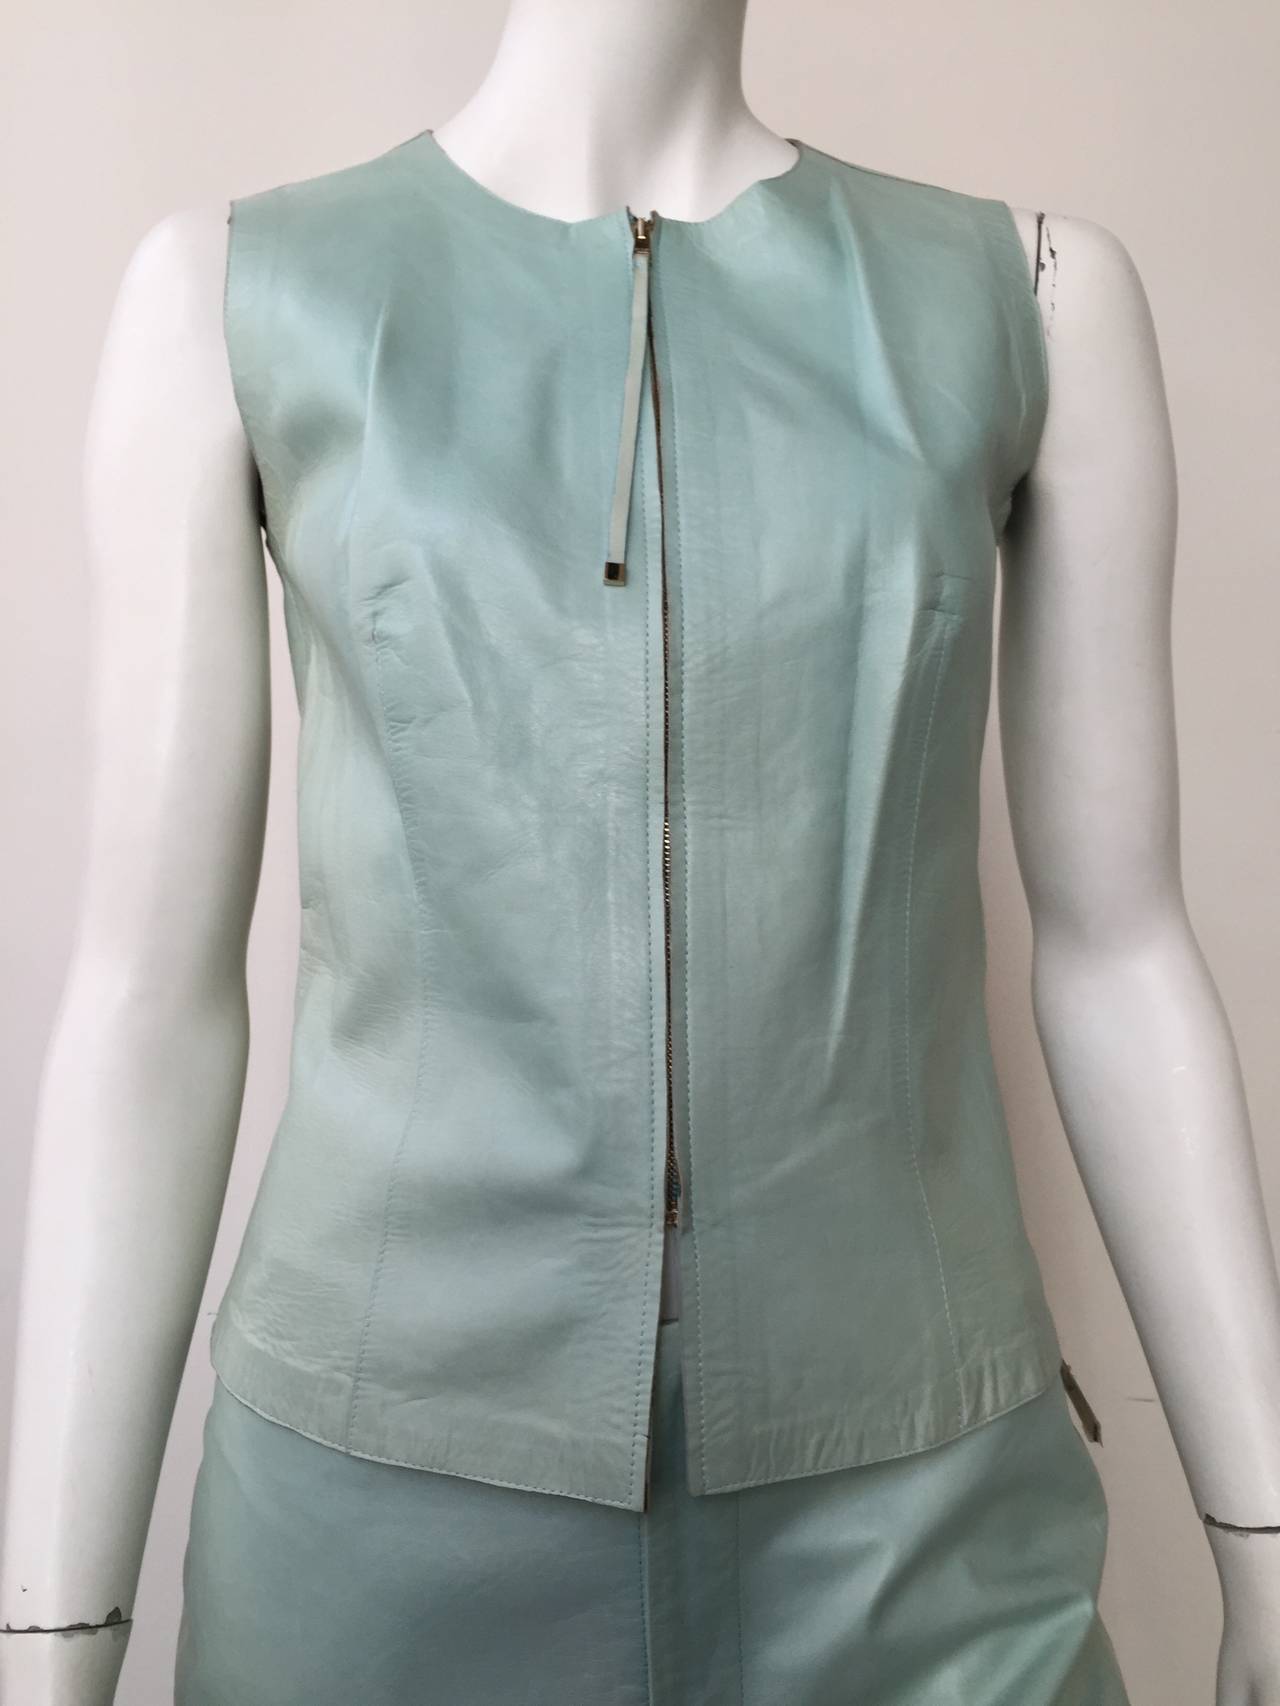 Gucci 90s for Neiman Marcus designed by Tom Ford 2 piece aqua leather vest & pants still with original tag. Vest is a zipper front with long skinny pull tab with Gucci written on it. Vest is not lined. Vest size tag says its a size 40 or USA size 6